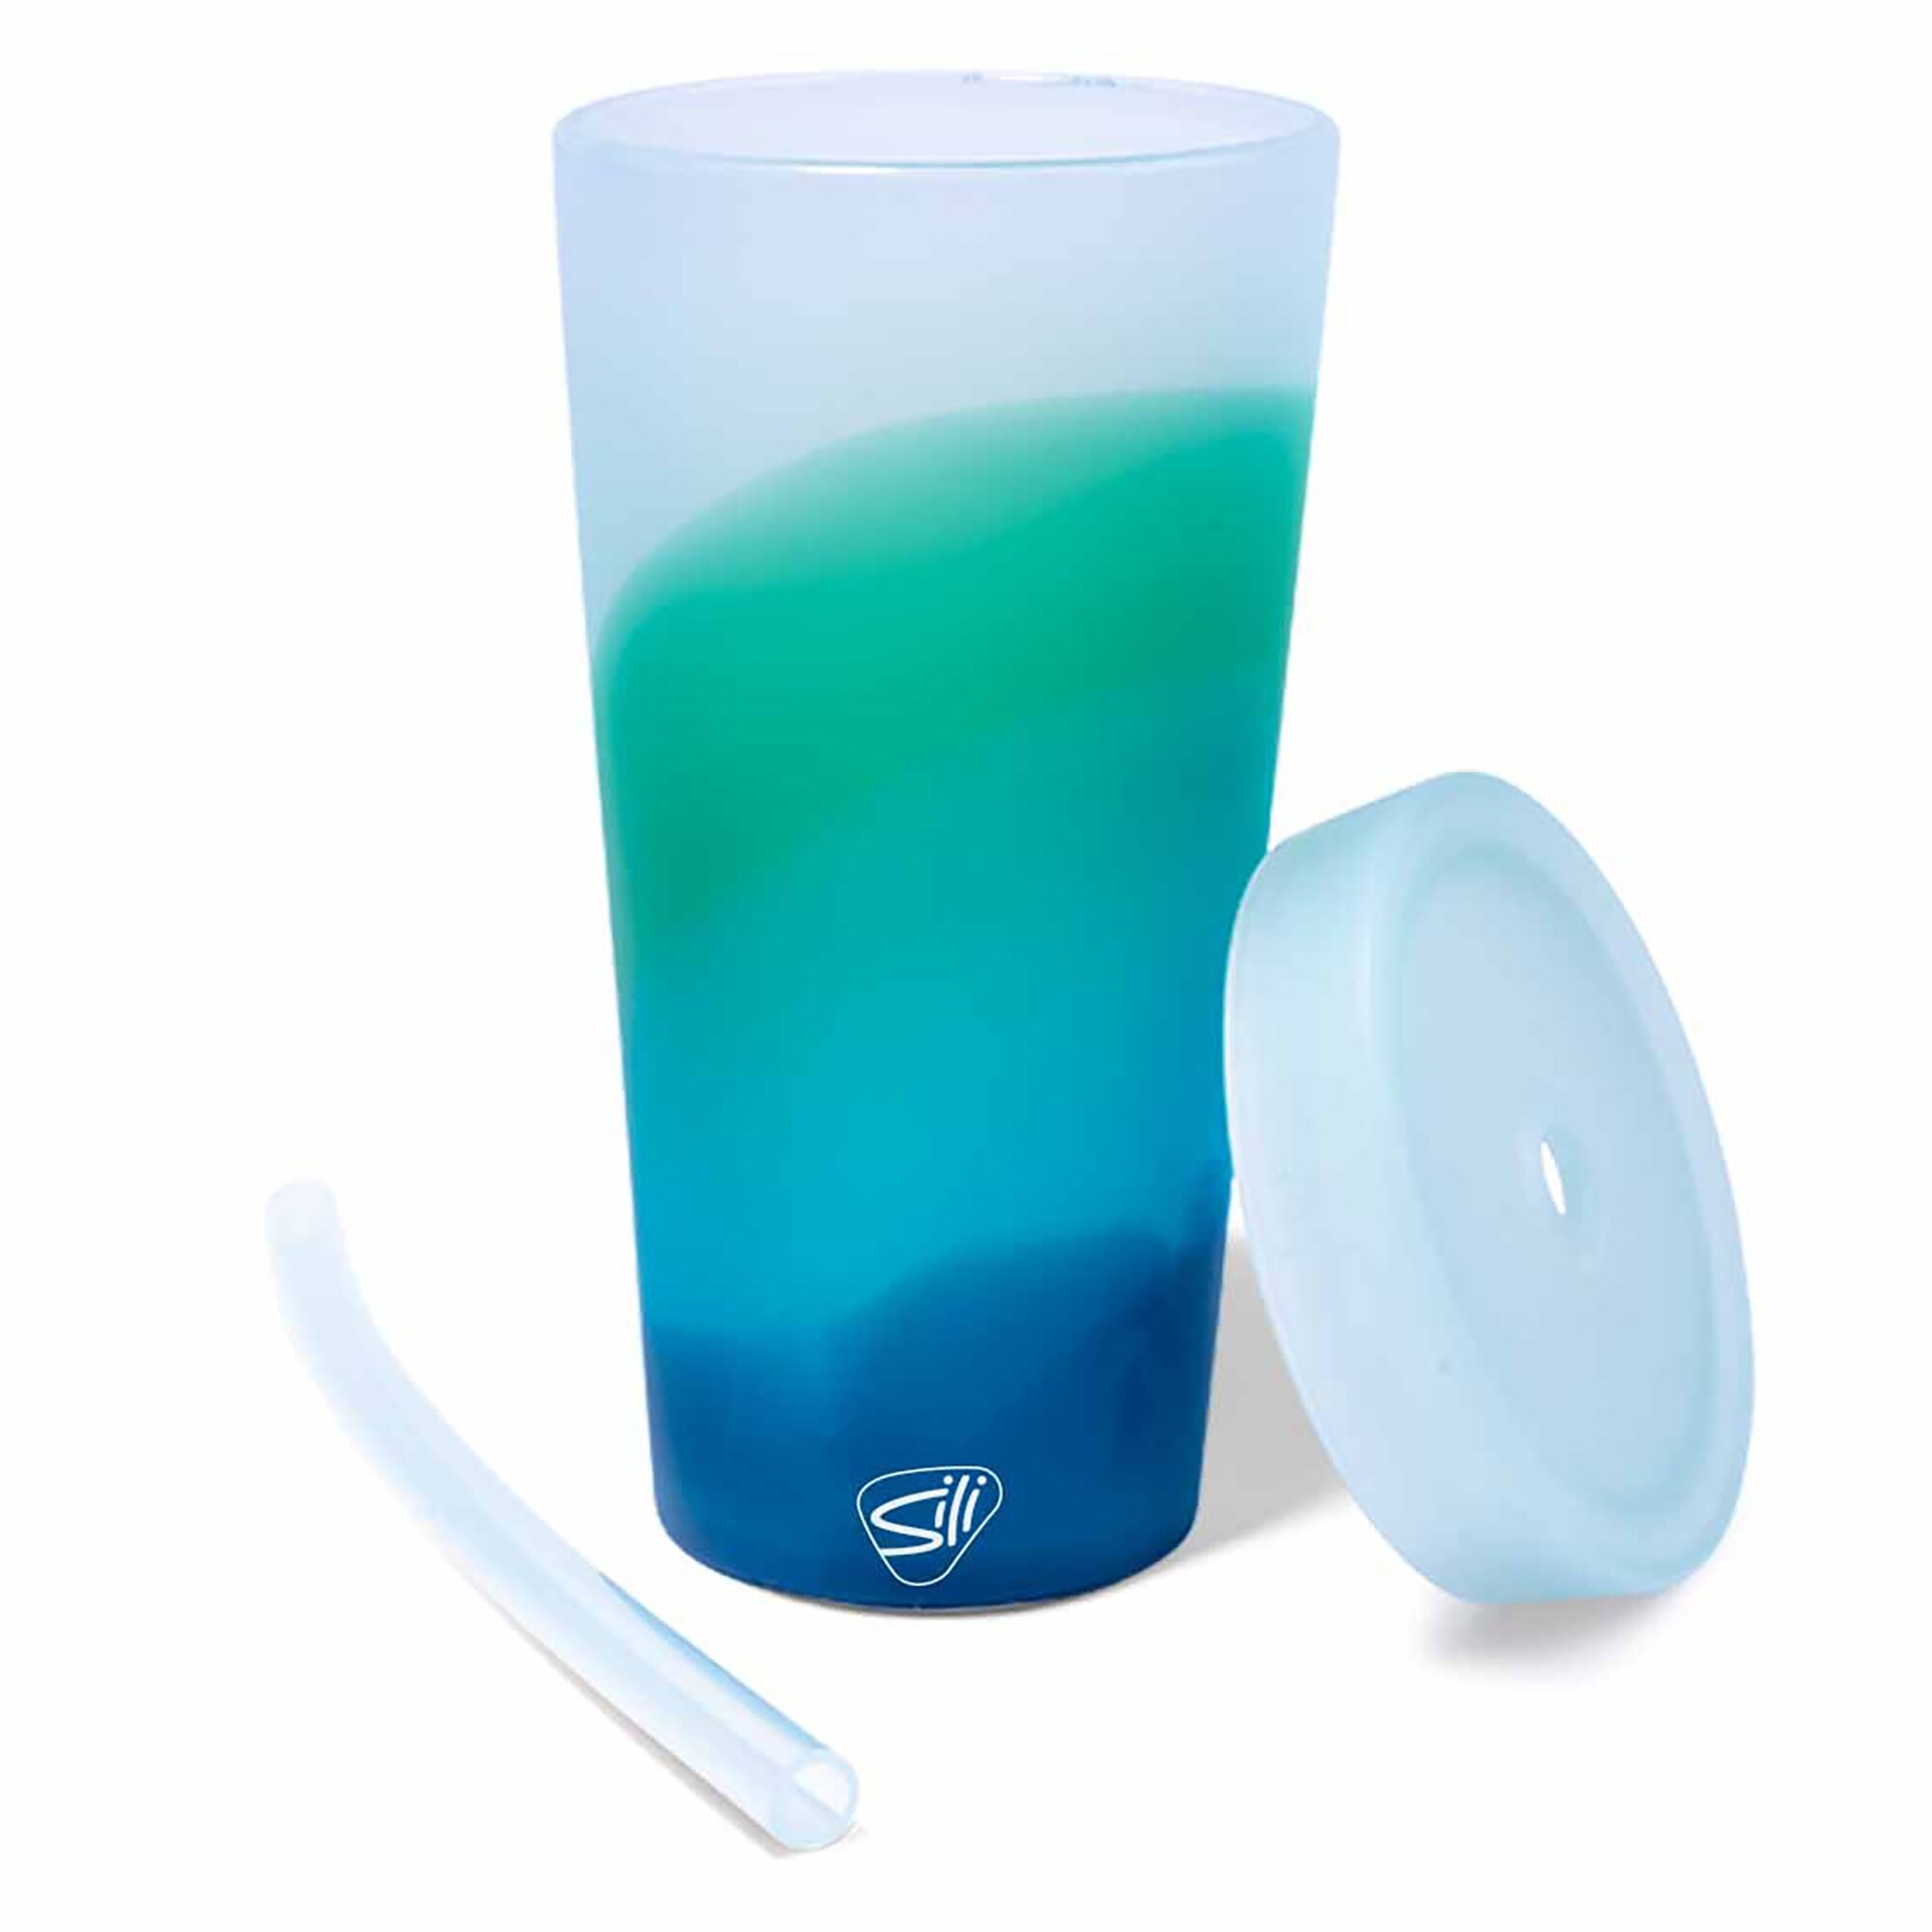 https://ak1.ostkcdn.com/images/products/is/images/direct/0134e28d68e247866559b6dd7f8603924951fa16/Silipint%3A-Silicone-22oz-Straw-Tumbler%3A-Mountain-Air---Reusable%2C-Unbreakable%2C-Flexible%2C-Hot-Cold%2C-Airtight-Lid%2C-Travel.jpg